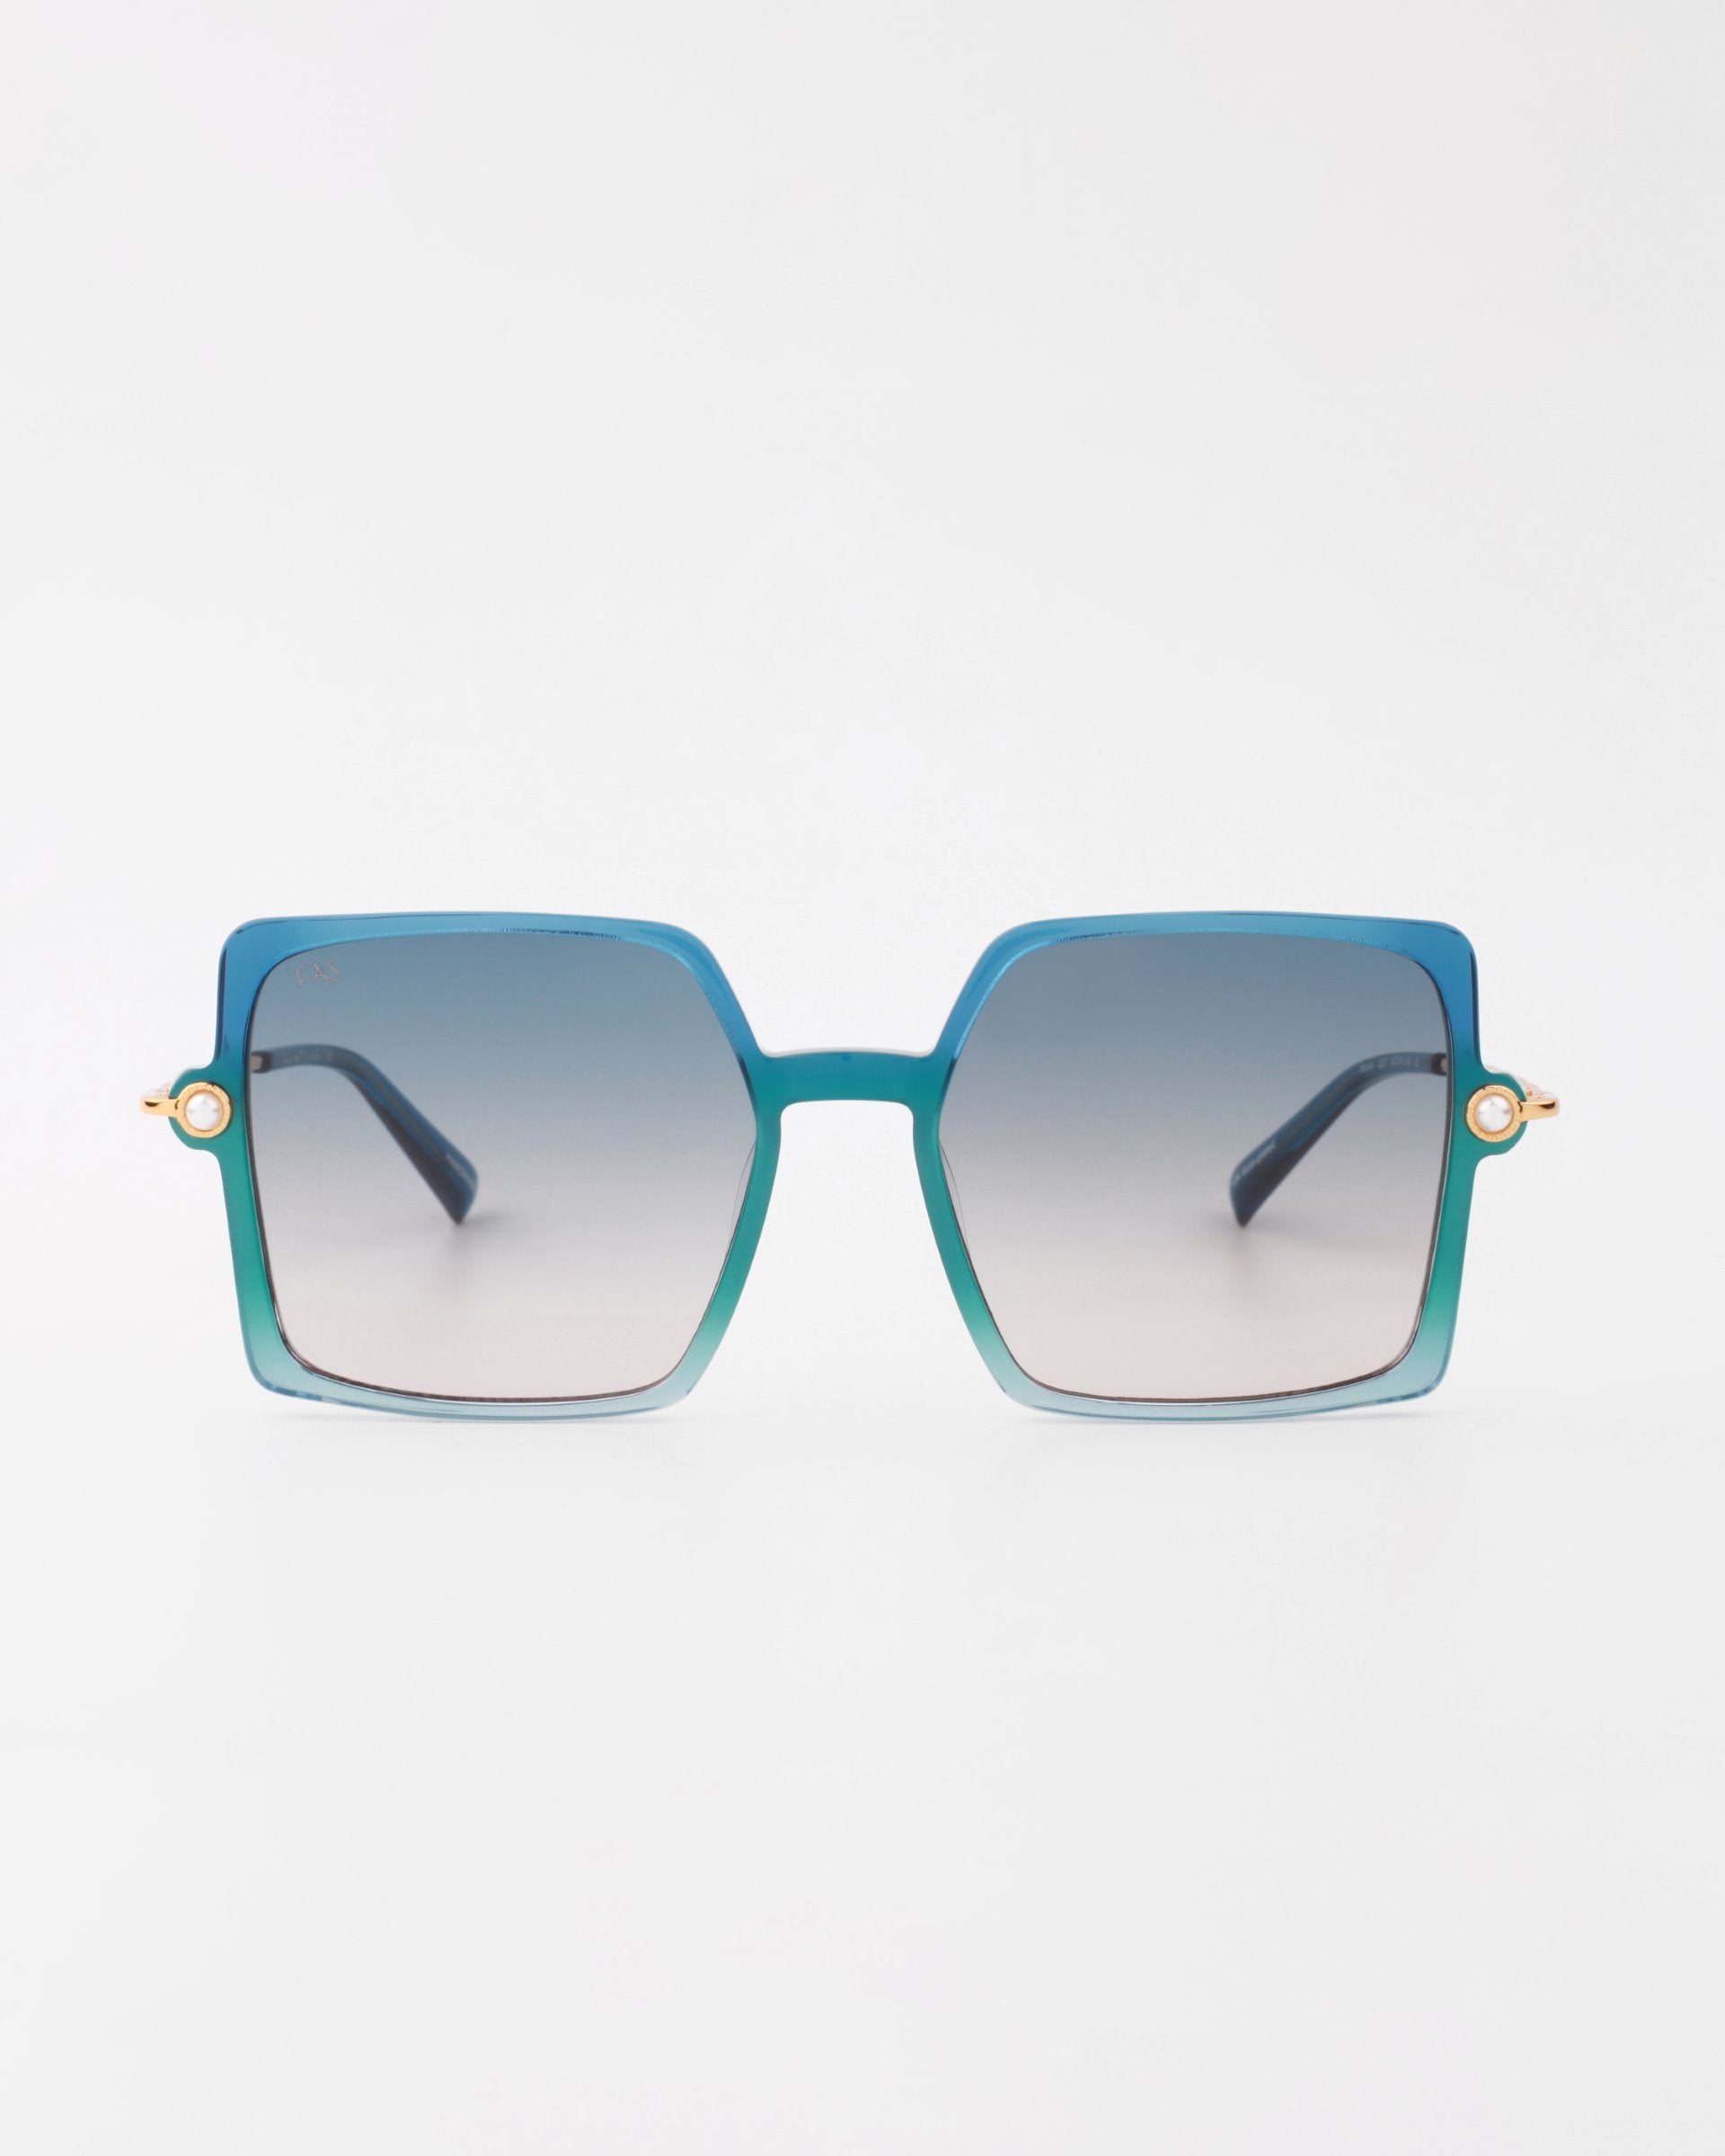 A pair of stylish handmade acetate sunglasses with gradient blue square lenses and thin 18-karat gold-plated arms on the sides. The frame transitions from blue at the top to a lighter shade at the bottom, offering complete UVA &amp; UVB protection against harmful rays. The product is called Moxie by For Art&#39;s Sake®. The background is plain white.